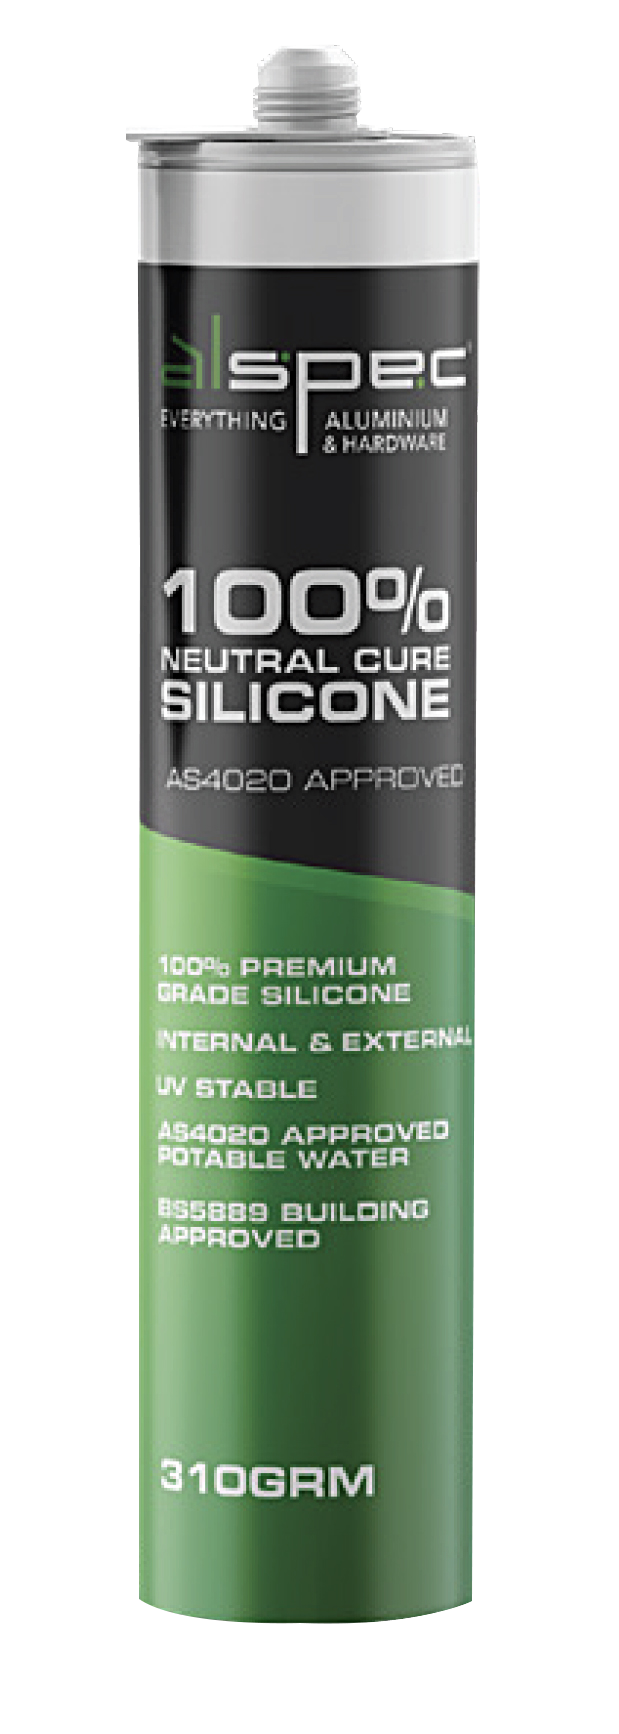 100% Neutral Cure Silicone